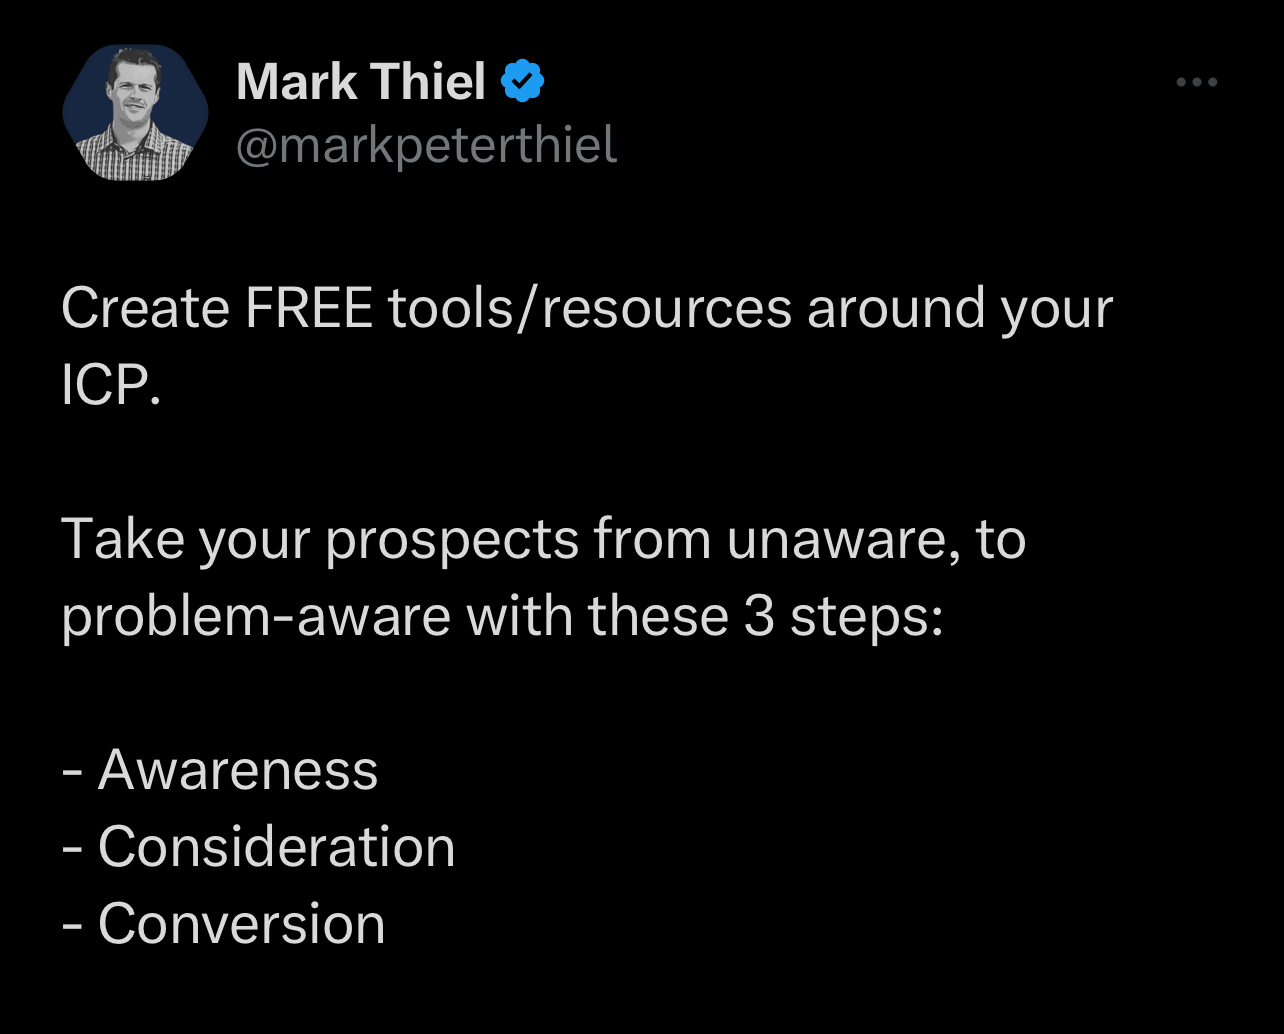 Create free tools for your ICP - Mark Thiel